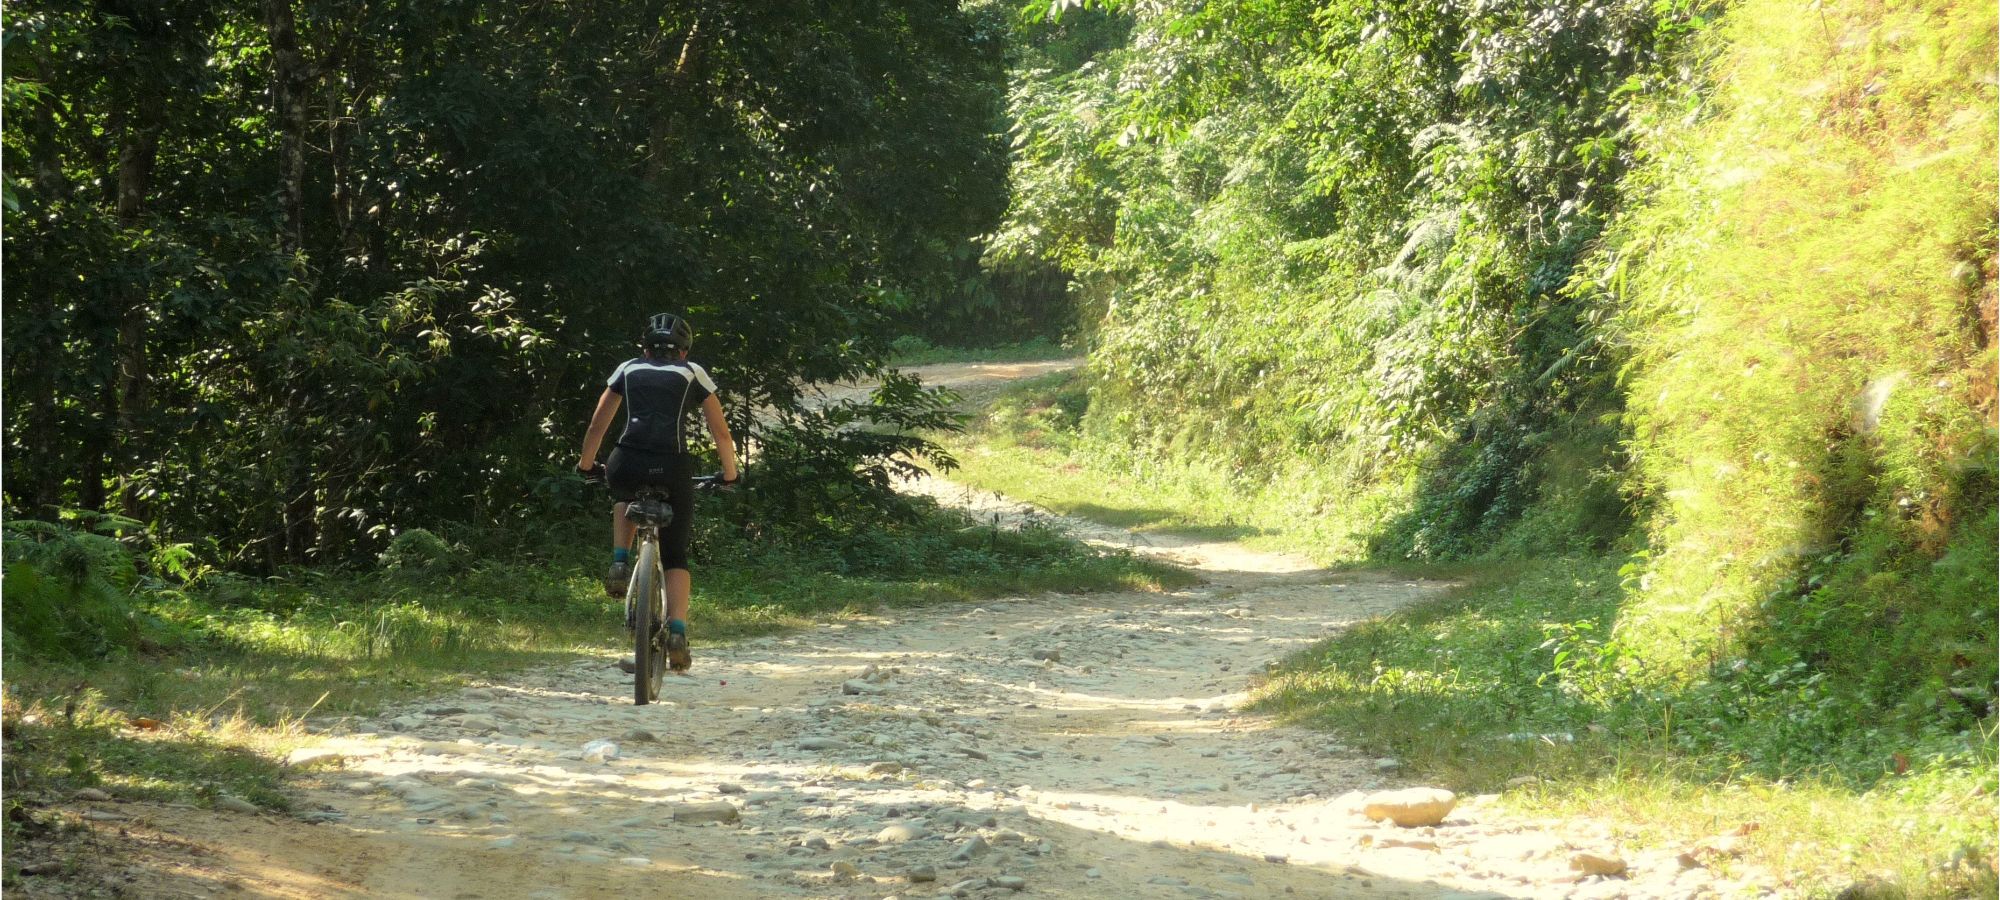 Photos from our Nepal Cycling Holiday